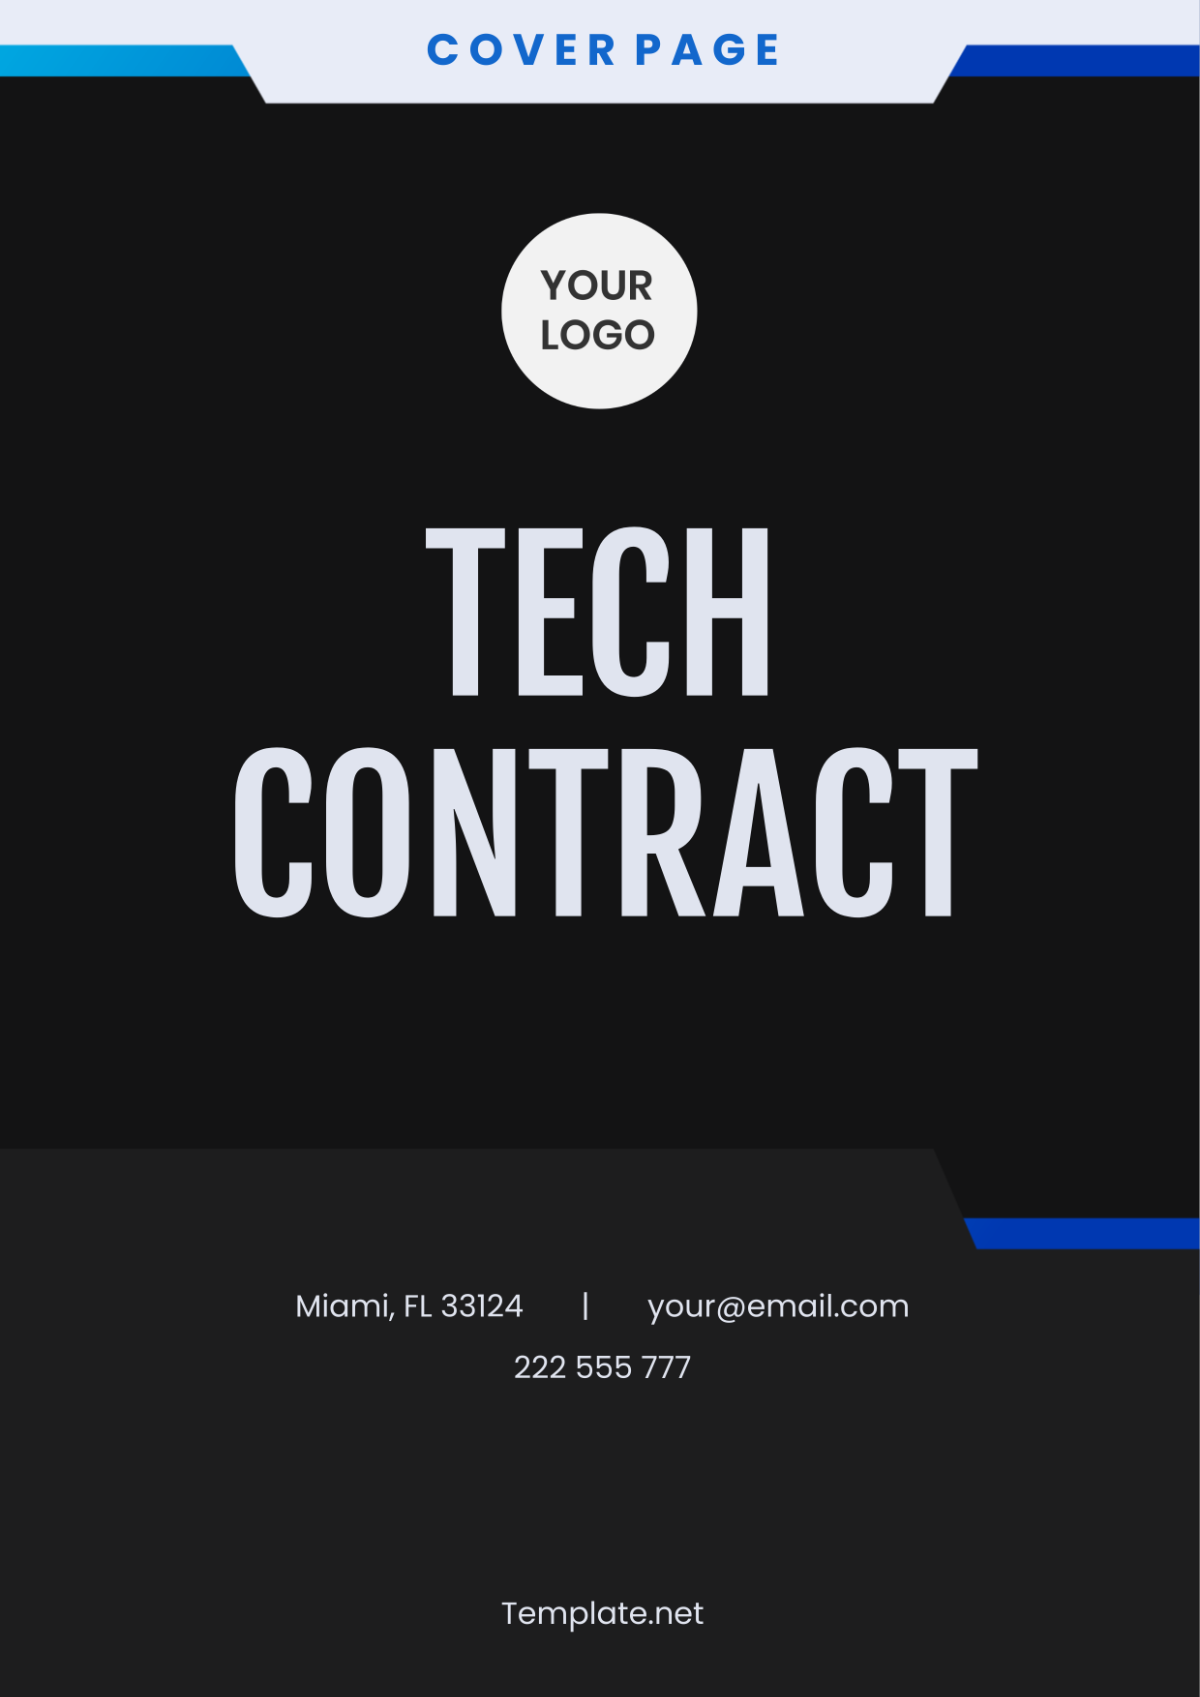 Tech Contract Cover Page